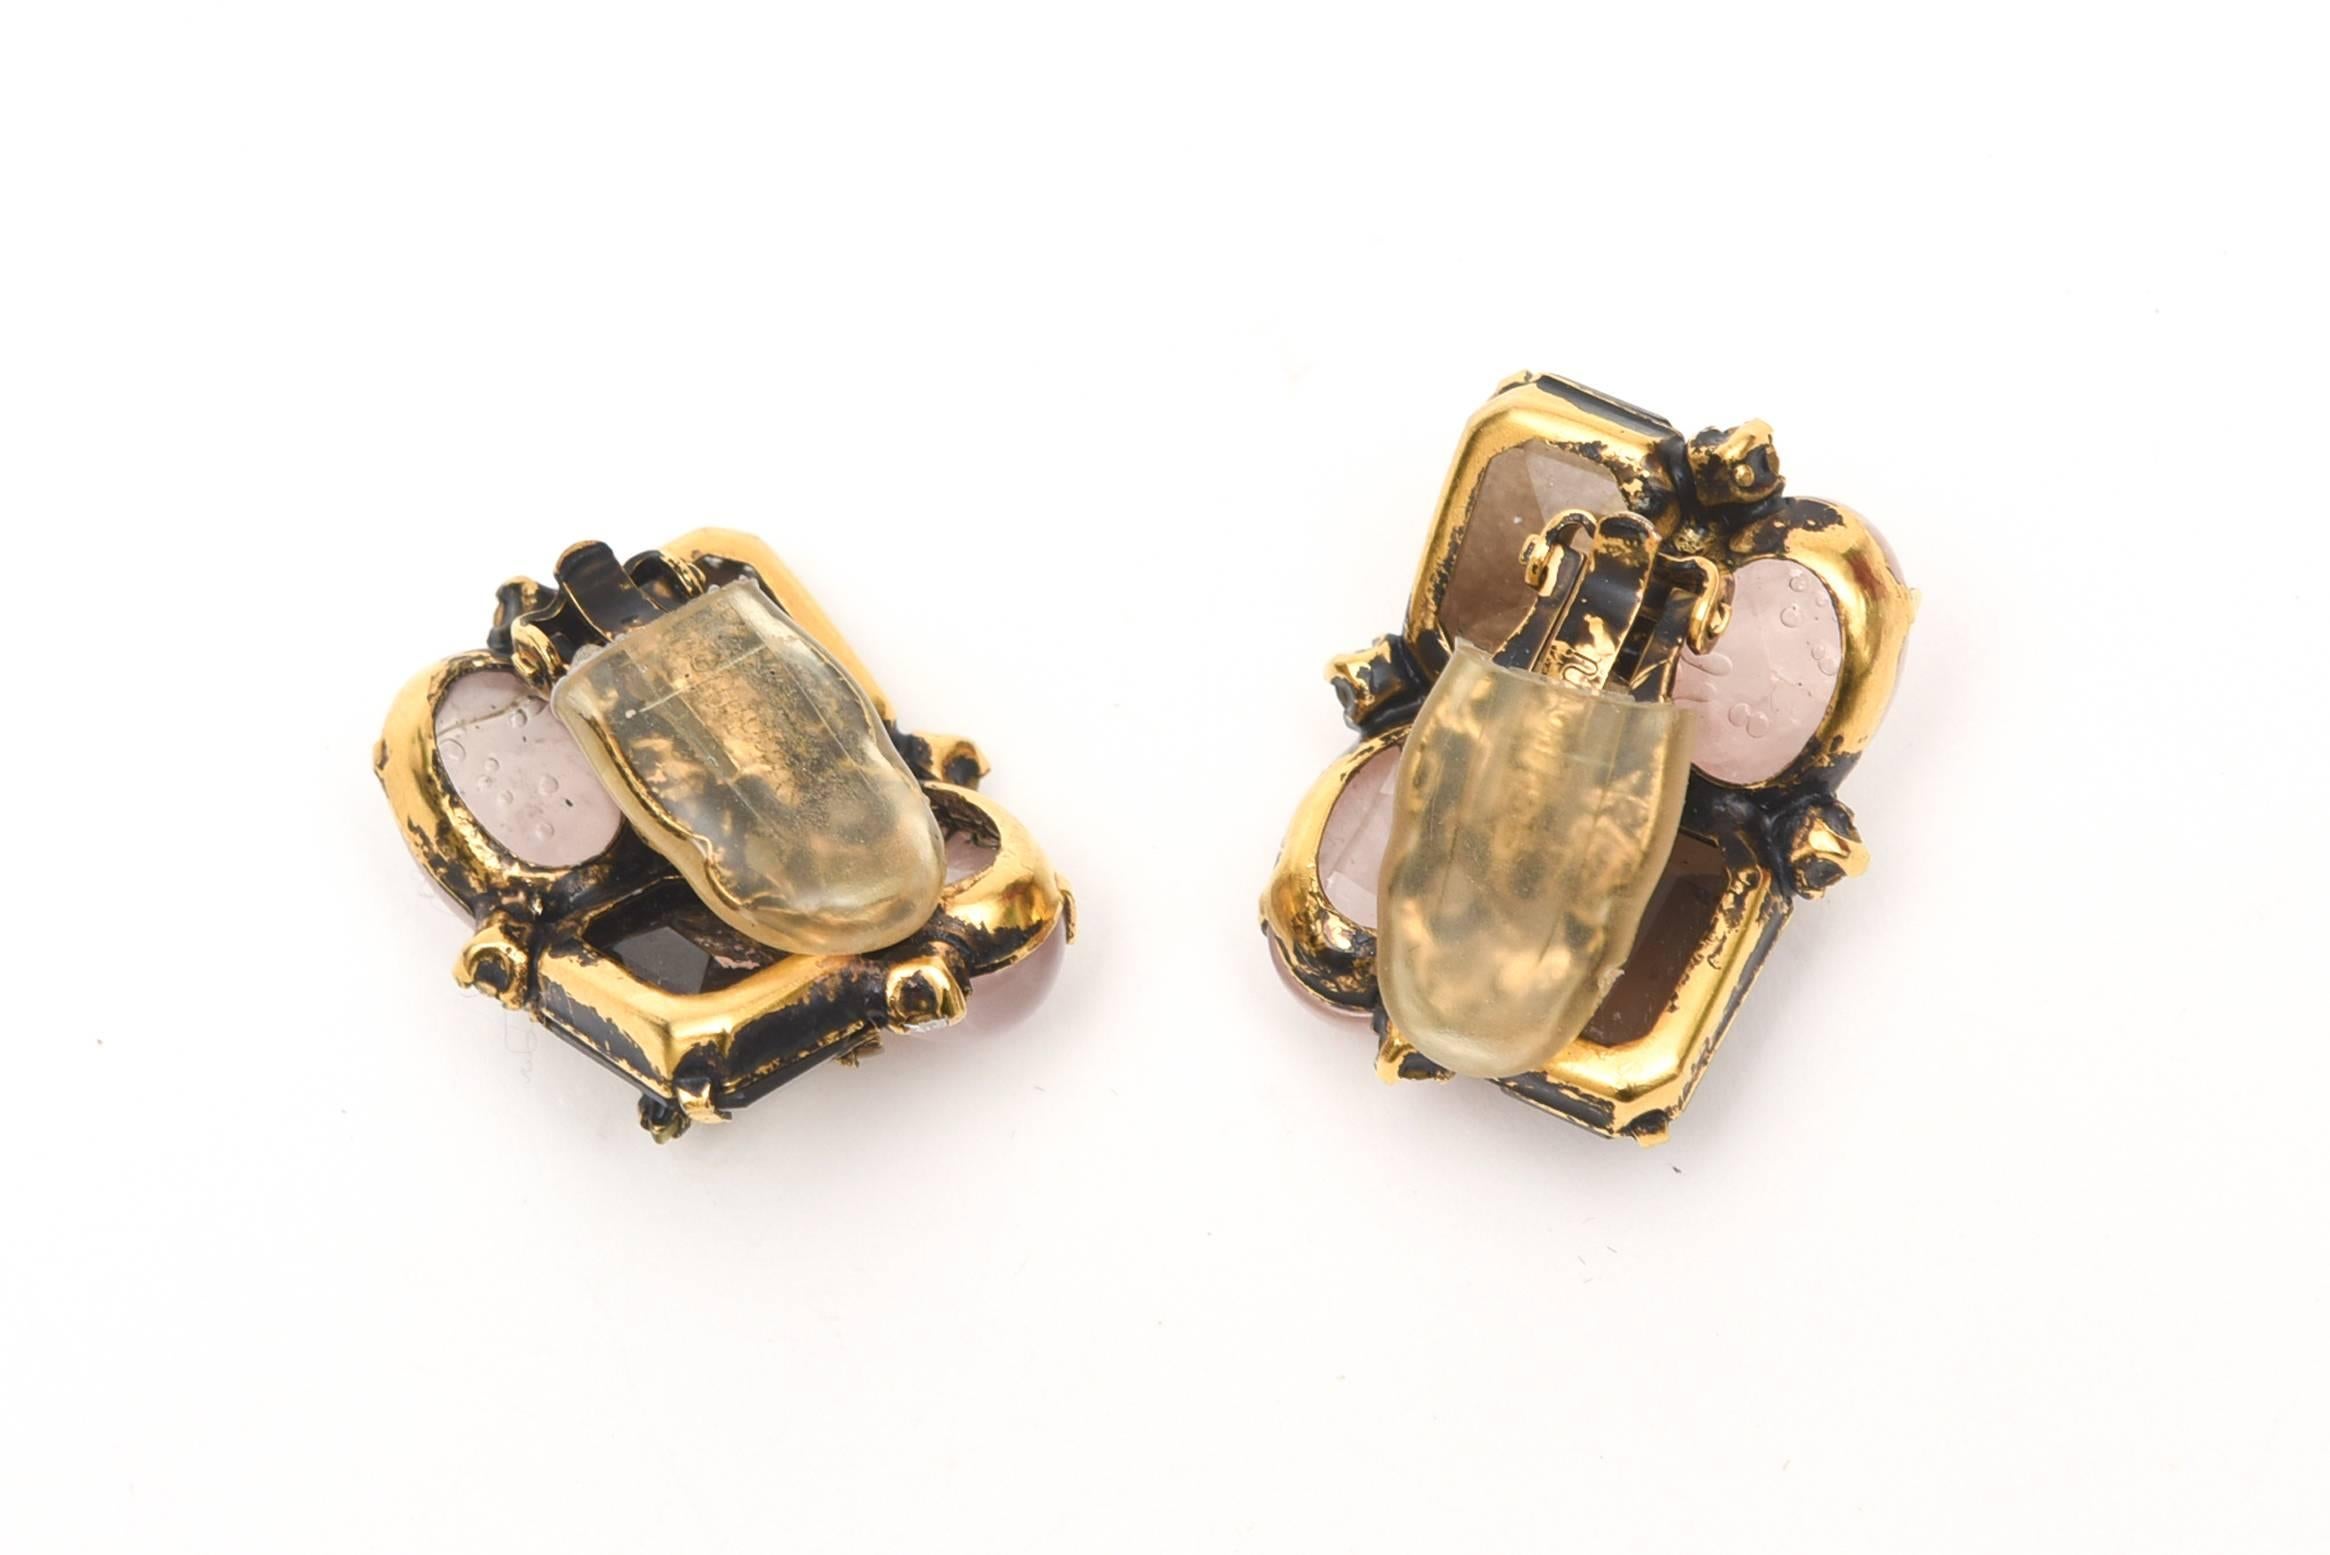 These stunning and beautiful pair of substantial clip on earrings are signed by Iradj Moini.The mix of dark to light rose quartz and smoky quartz is interspersed
with clear rhinestones in a flower form and and diamond like settings surrounding